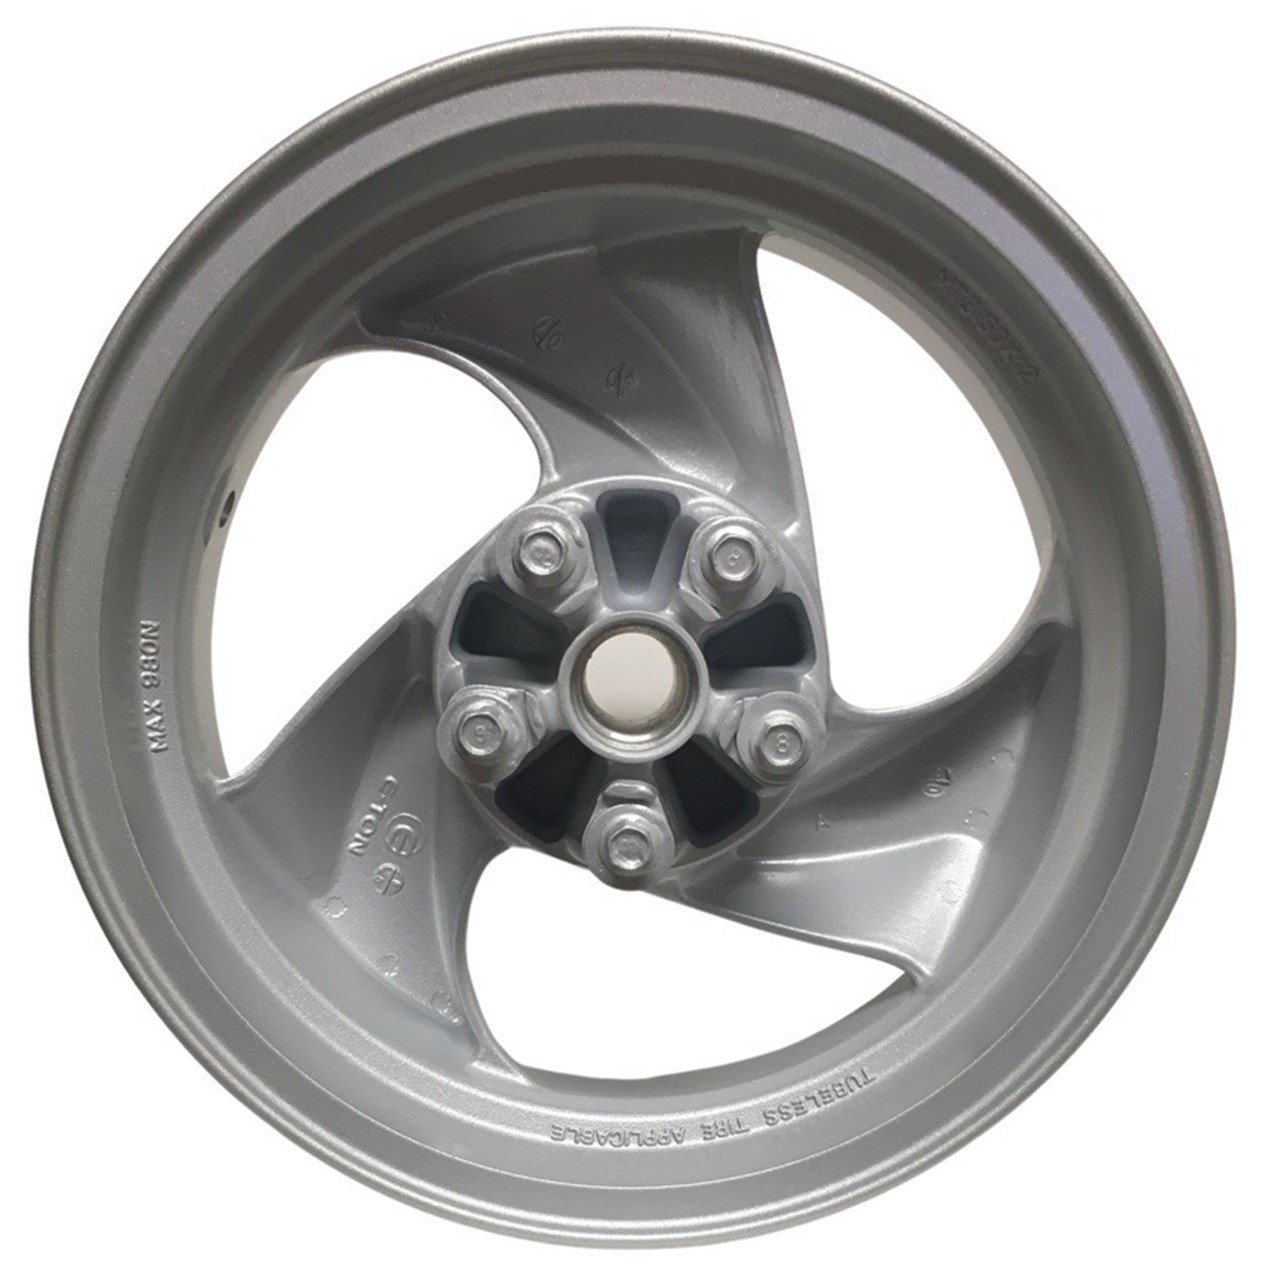 Front Wheel Rim (3.5x12), Rotor Bolt Pattern=5x80mm (50mm to adjacent stud) Offset=1.25 in, Shaft ID=30 mm, Silver Fite E-Ton Beamer R2-50, R4-150, Matrix 50, 150 Scooters + others